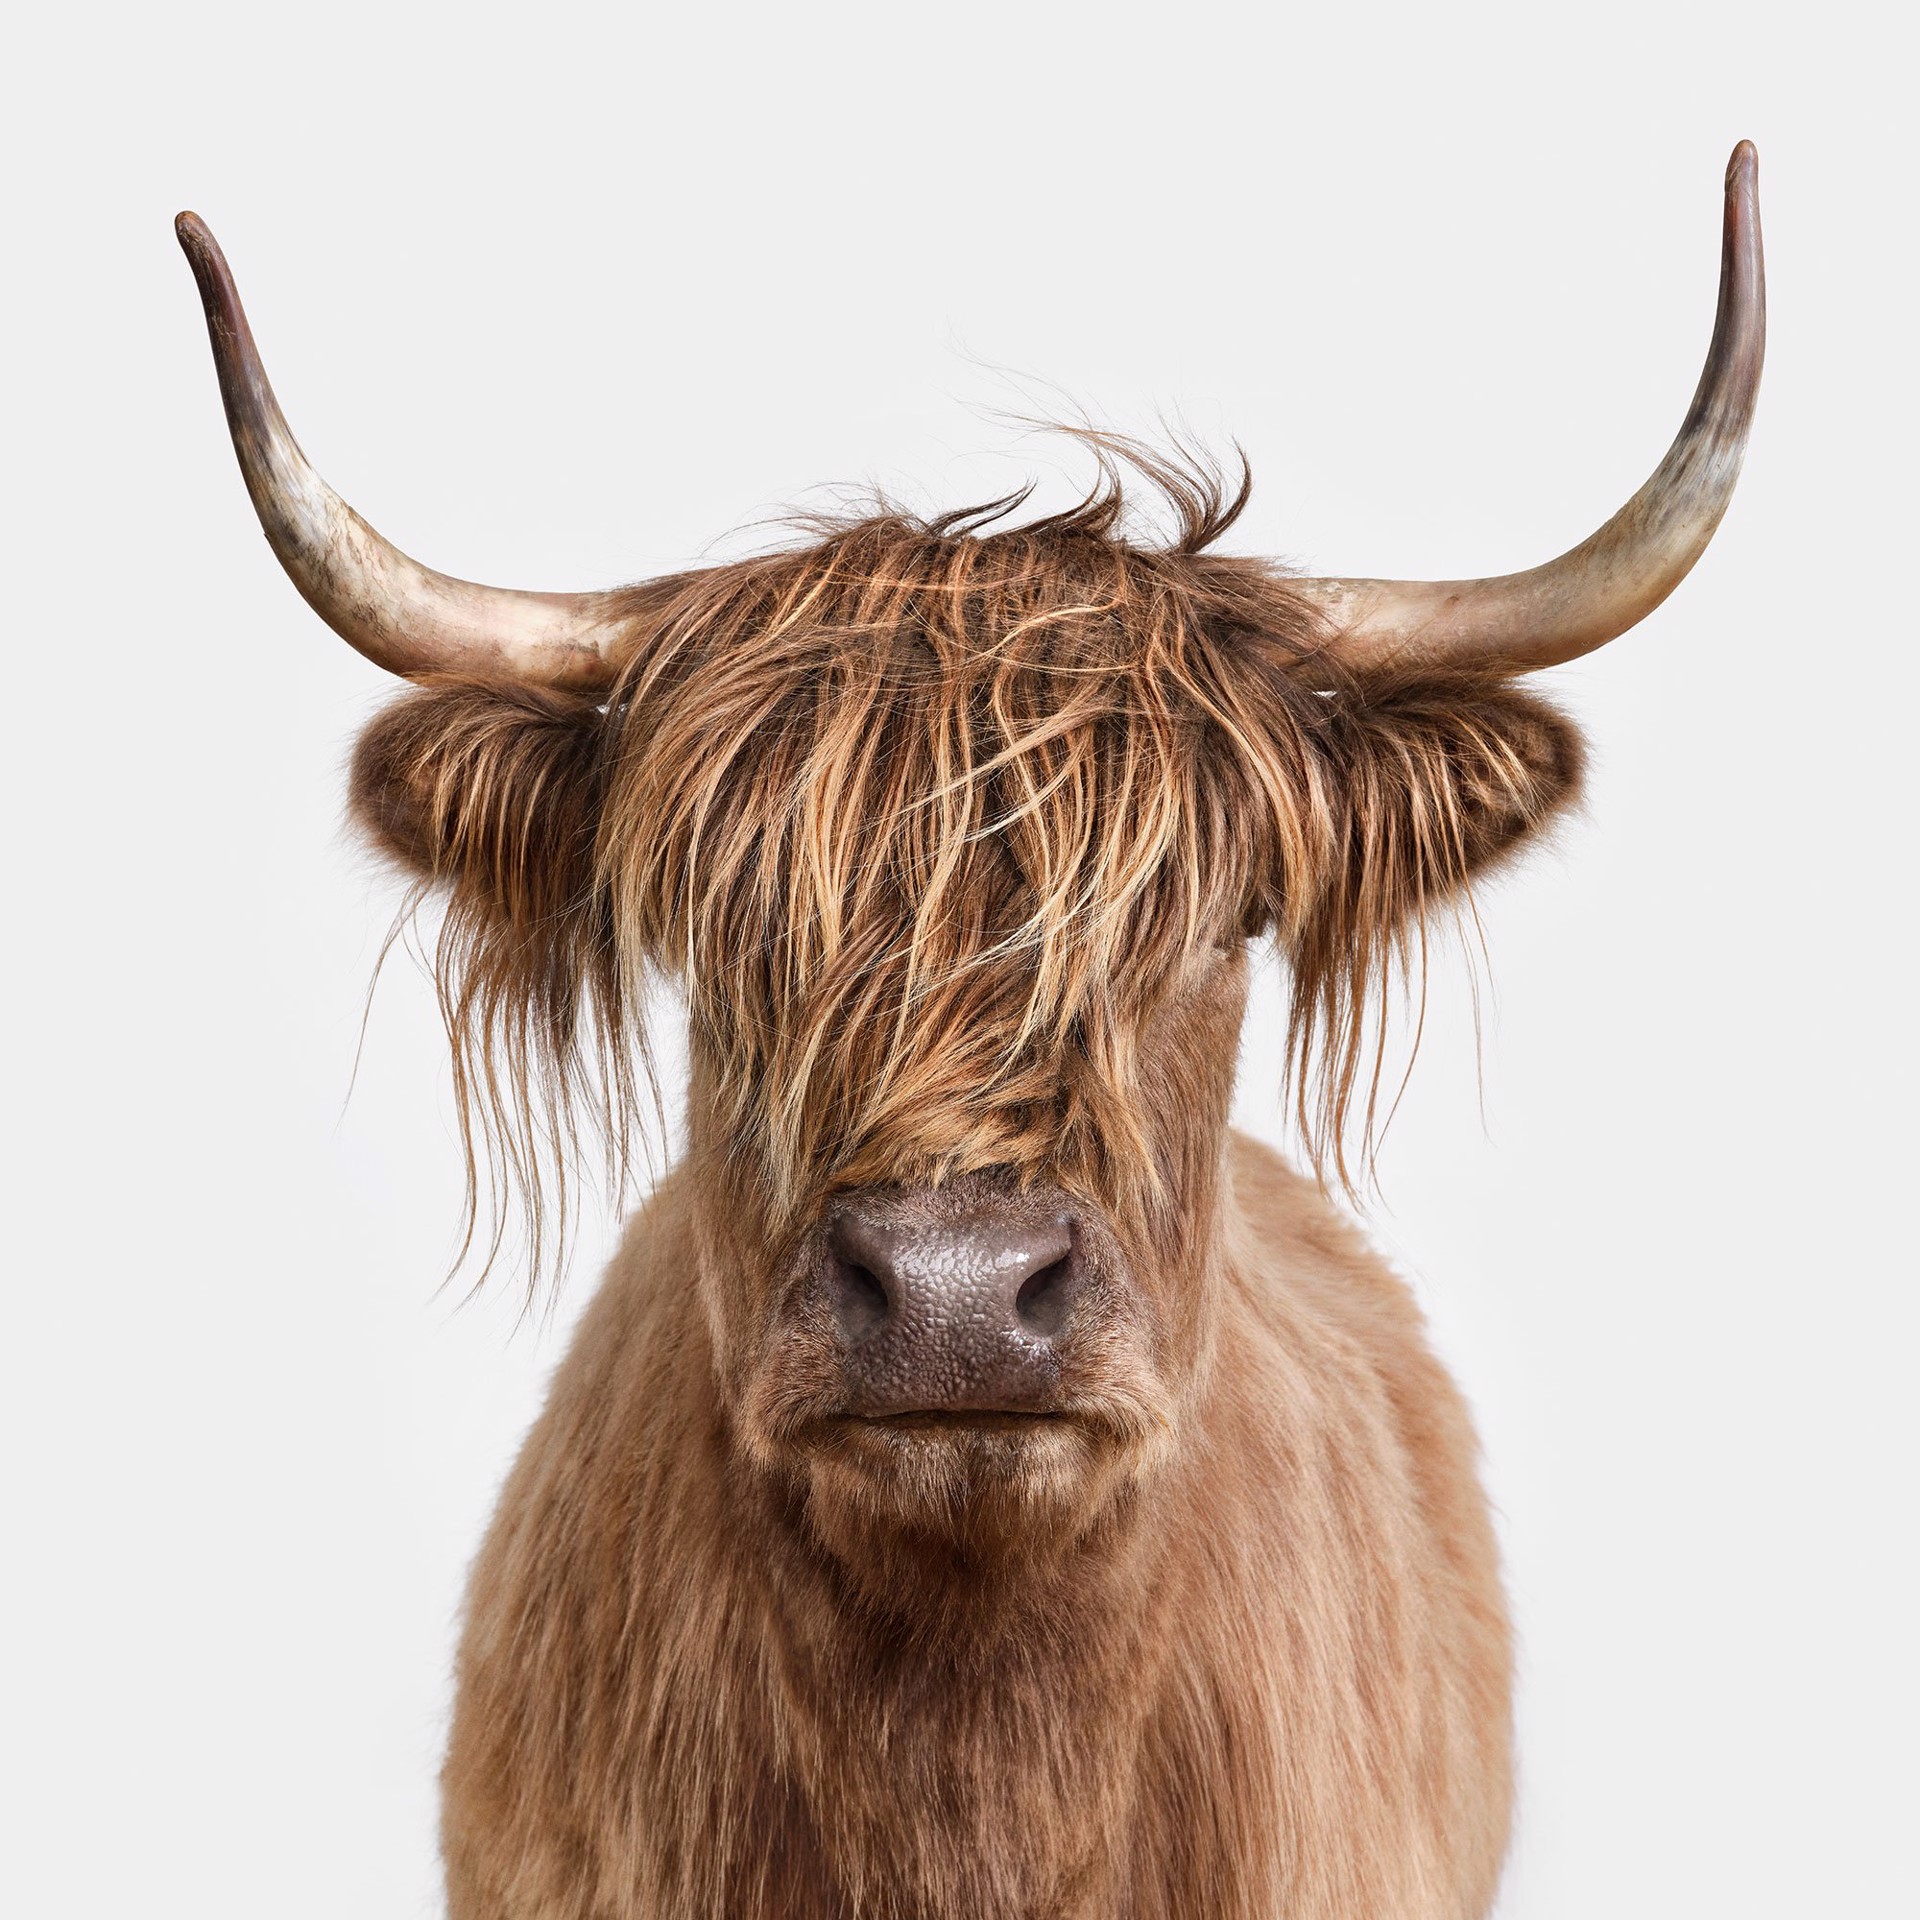 Highland Cow No. 5 by Randal Ford